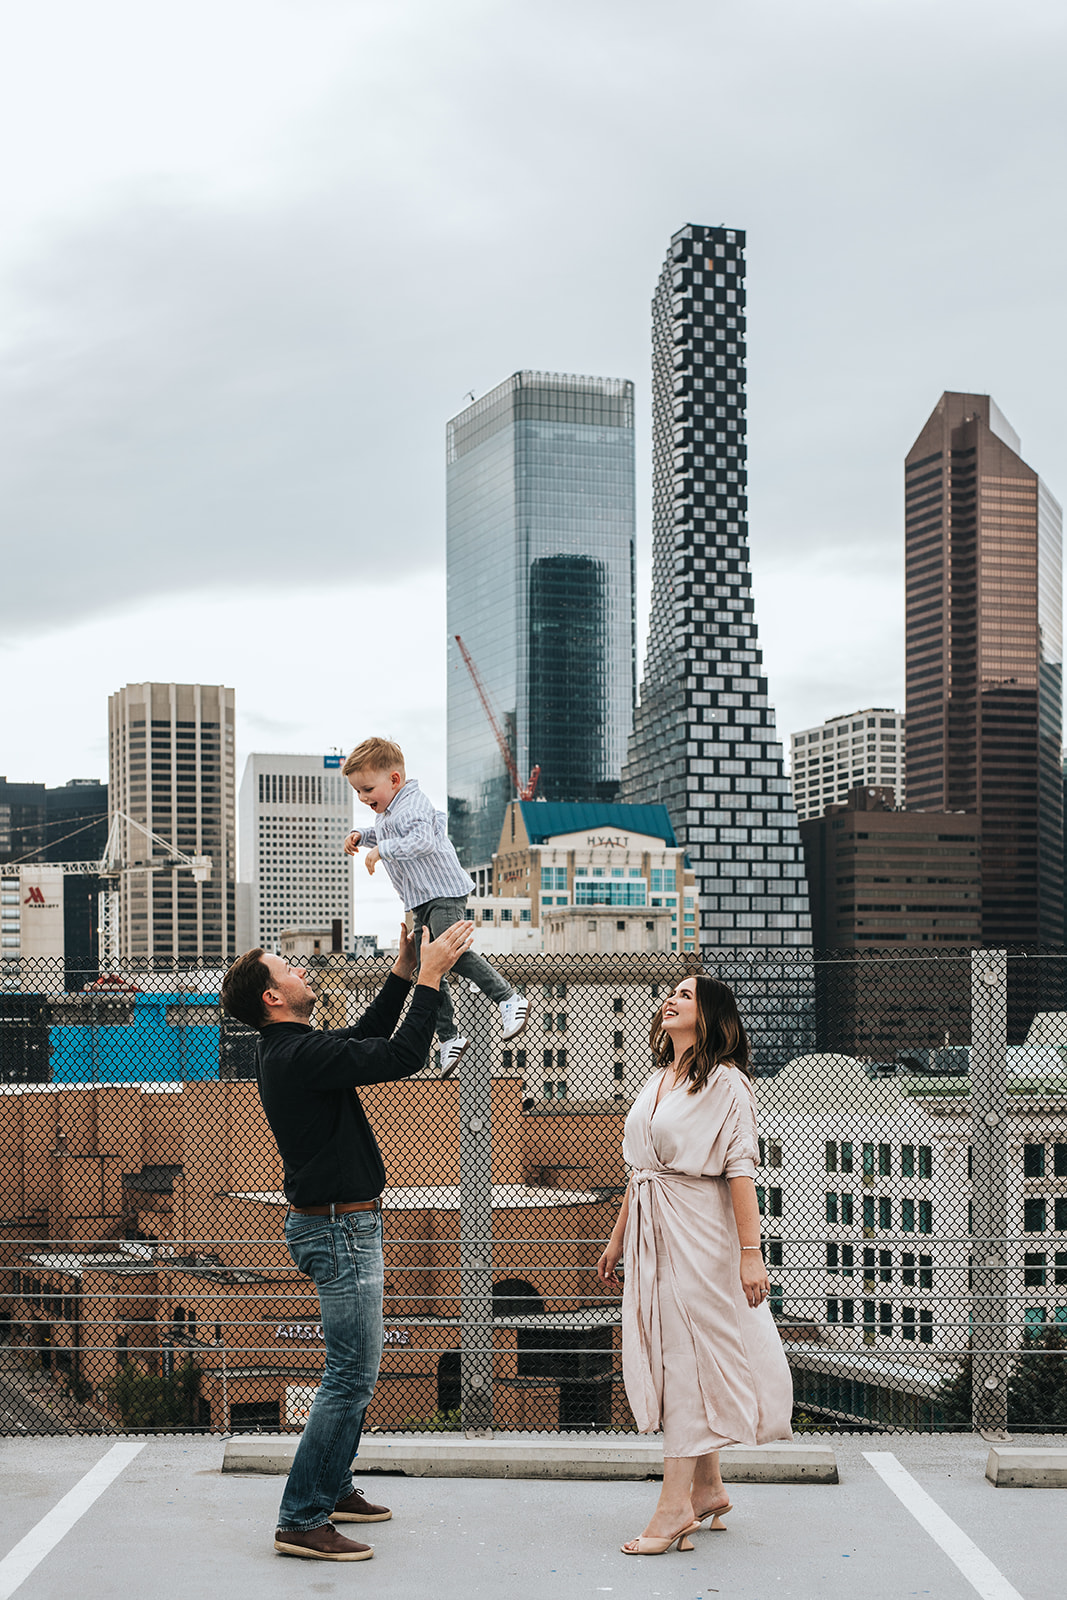 Choosing a Location for Your Family Photography Session